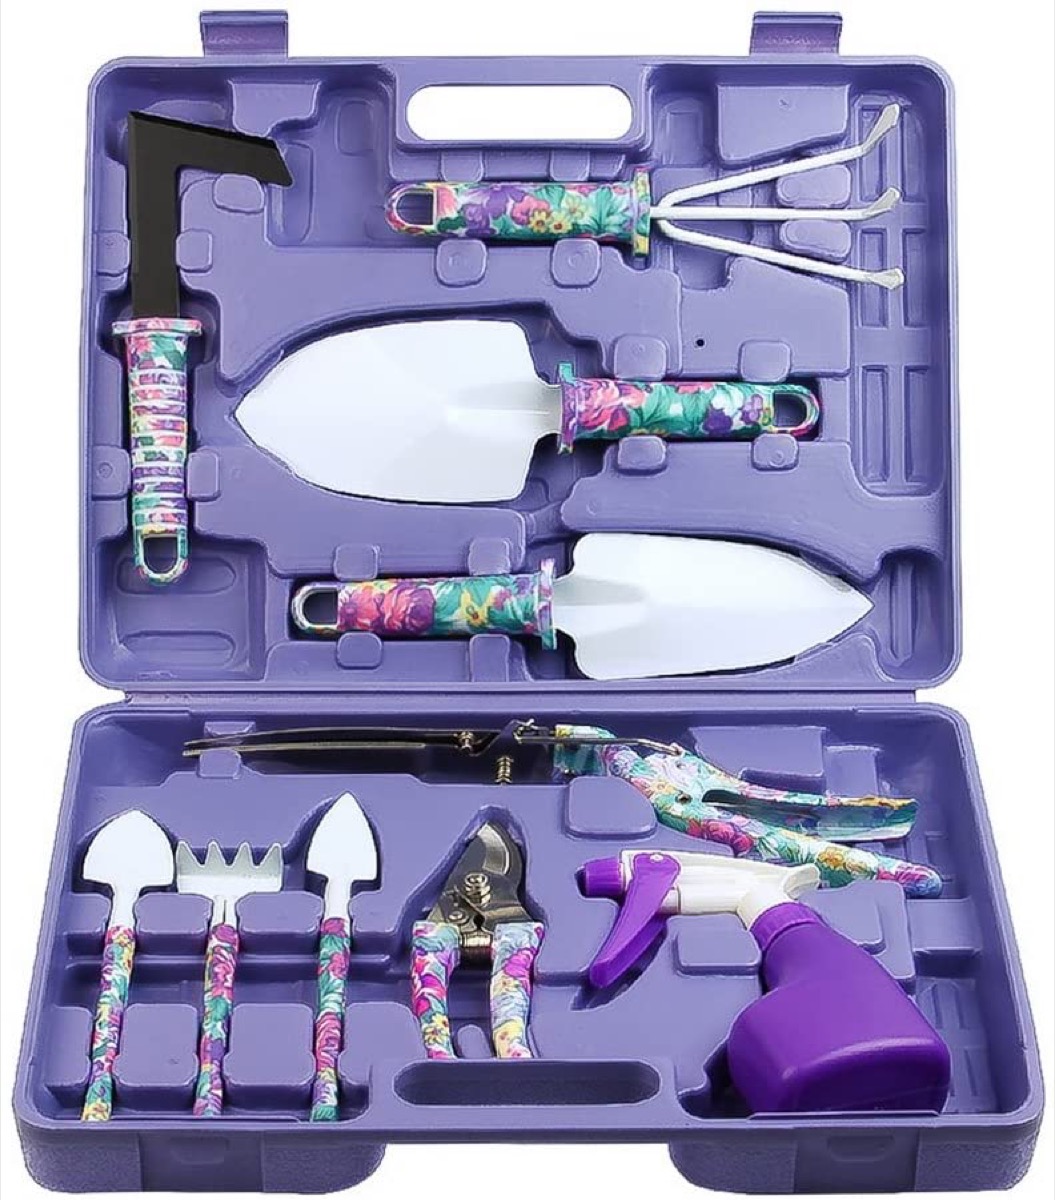 purple case full of floral patterned gardening tools